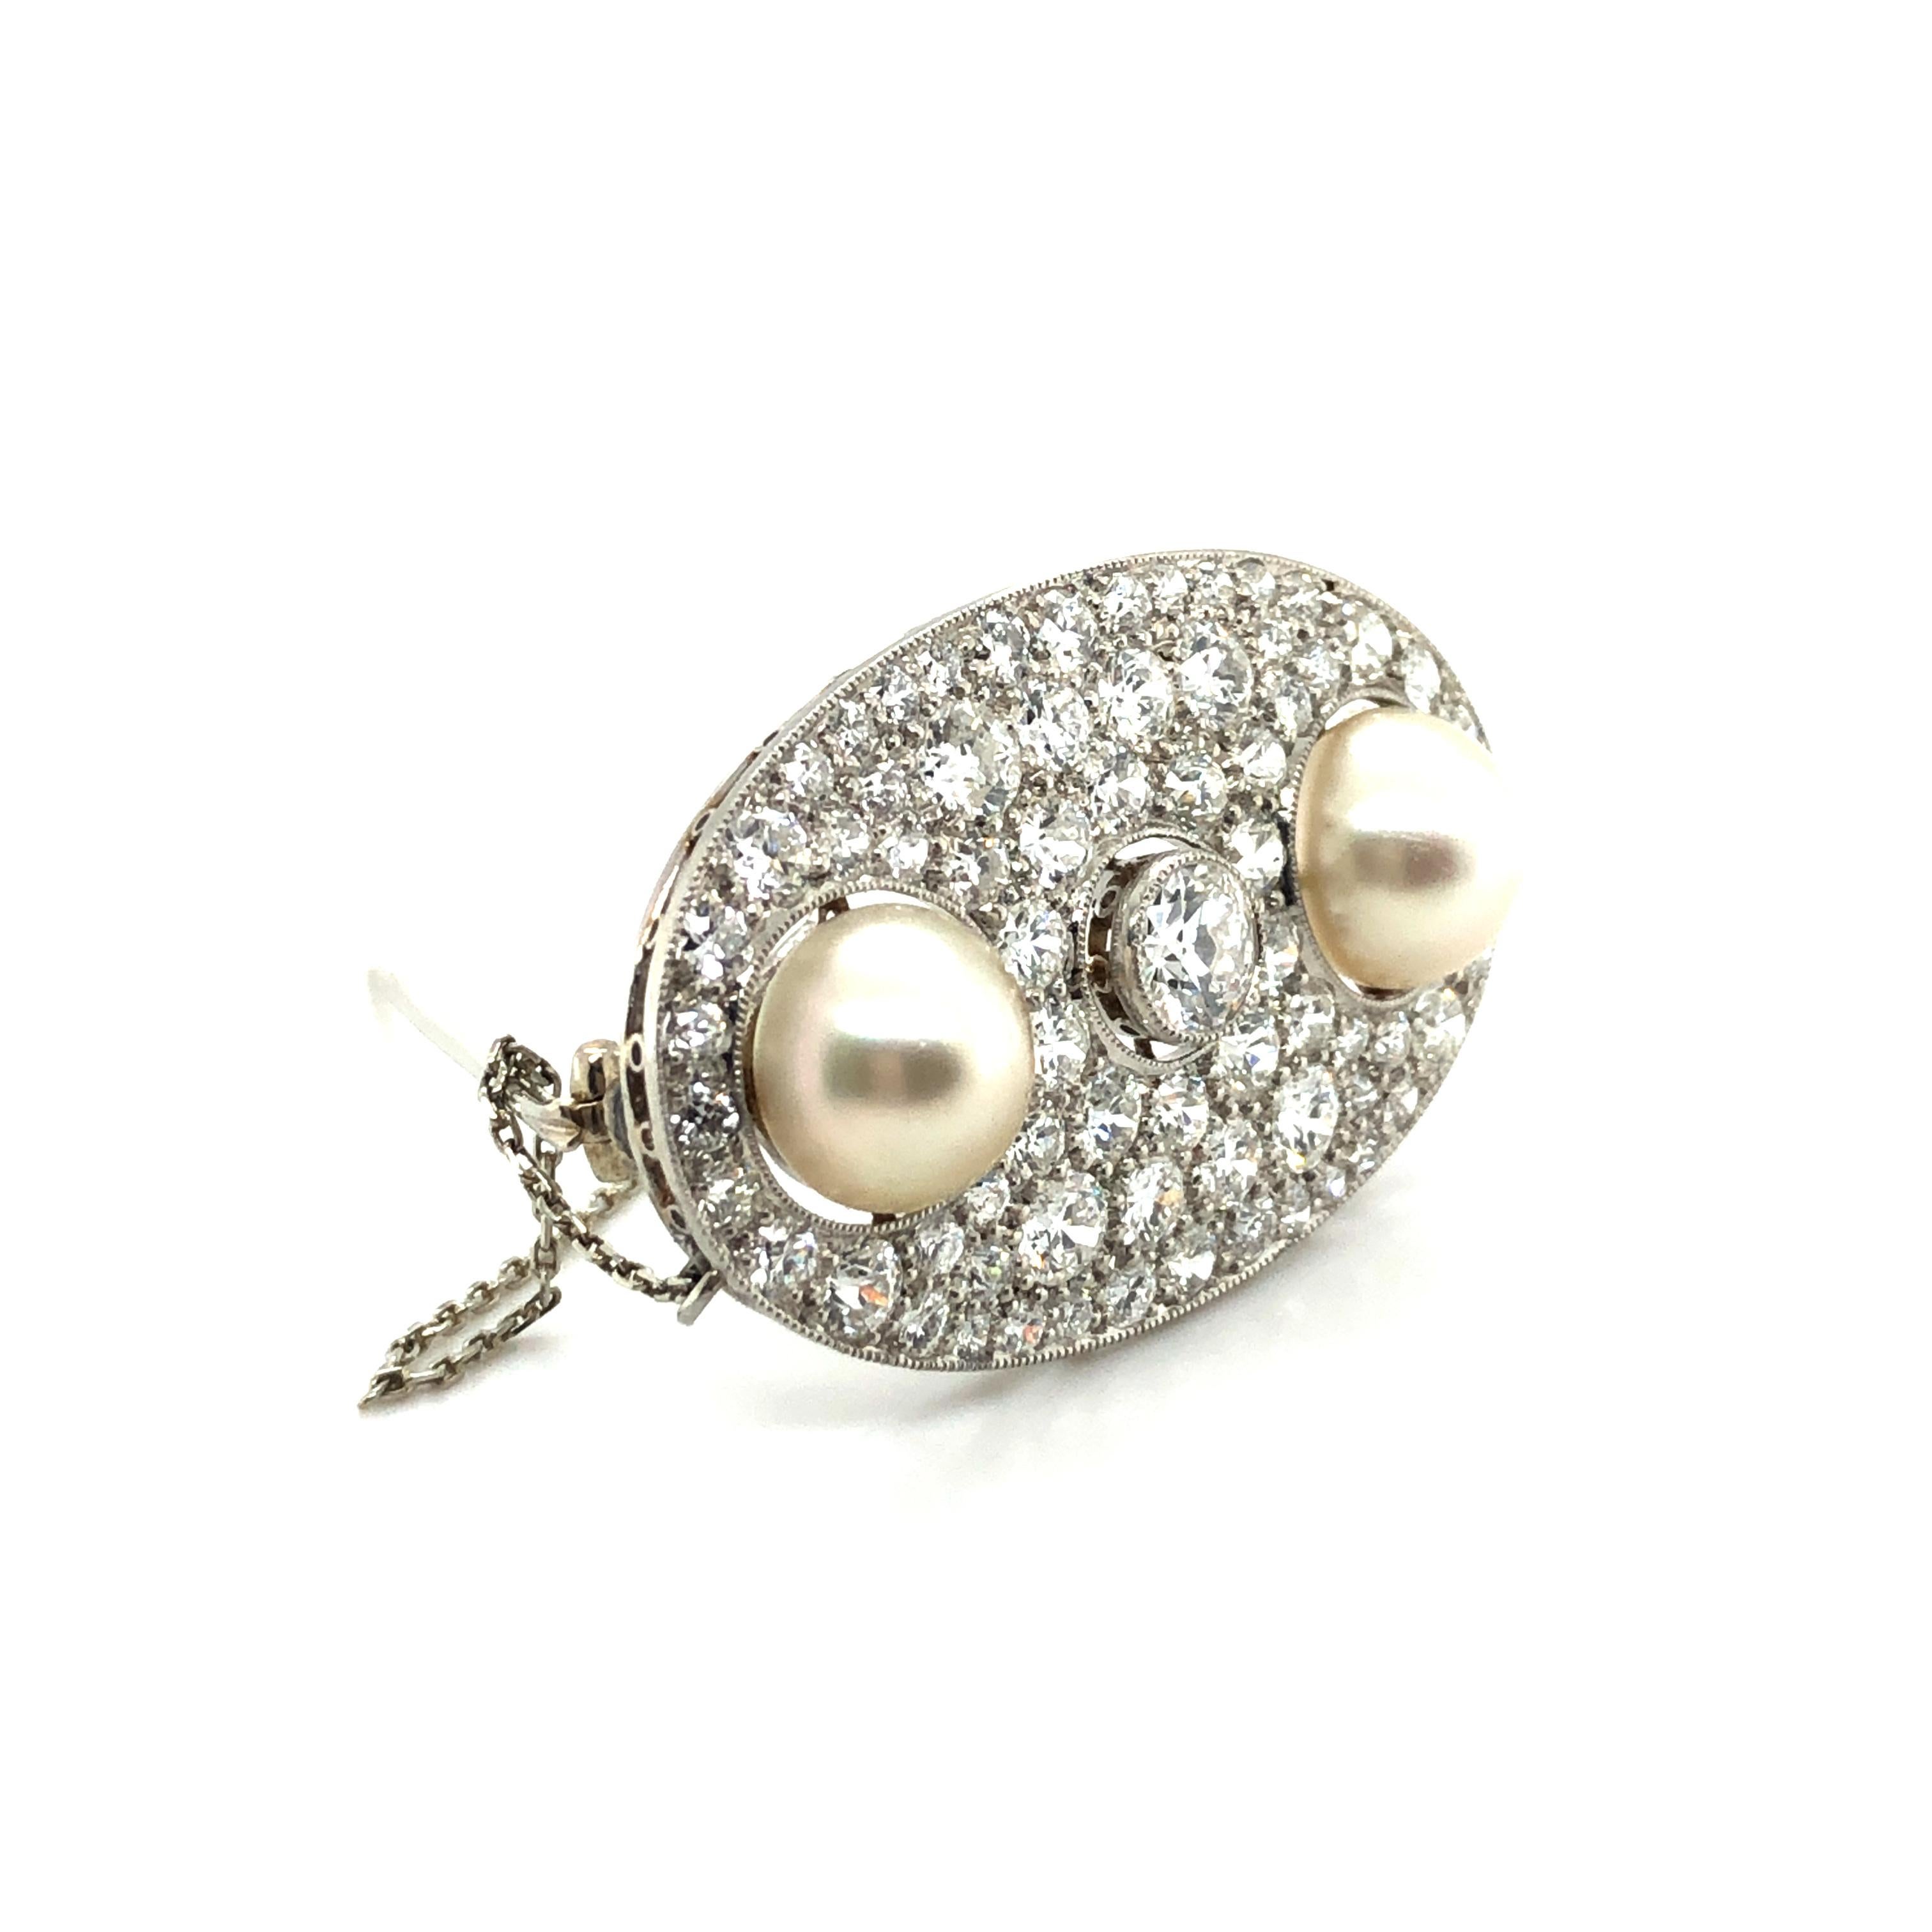 Certified Natural Pearl and Diamond Brooch in Platinum, ca. 1925 2